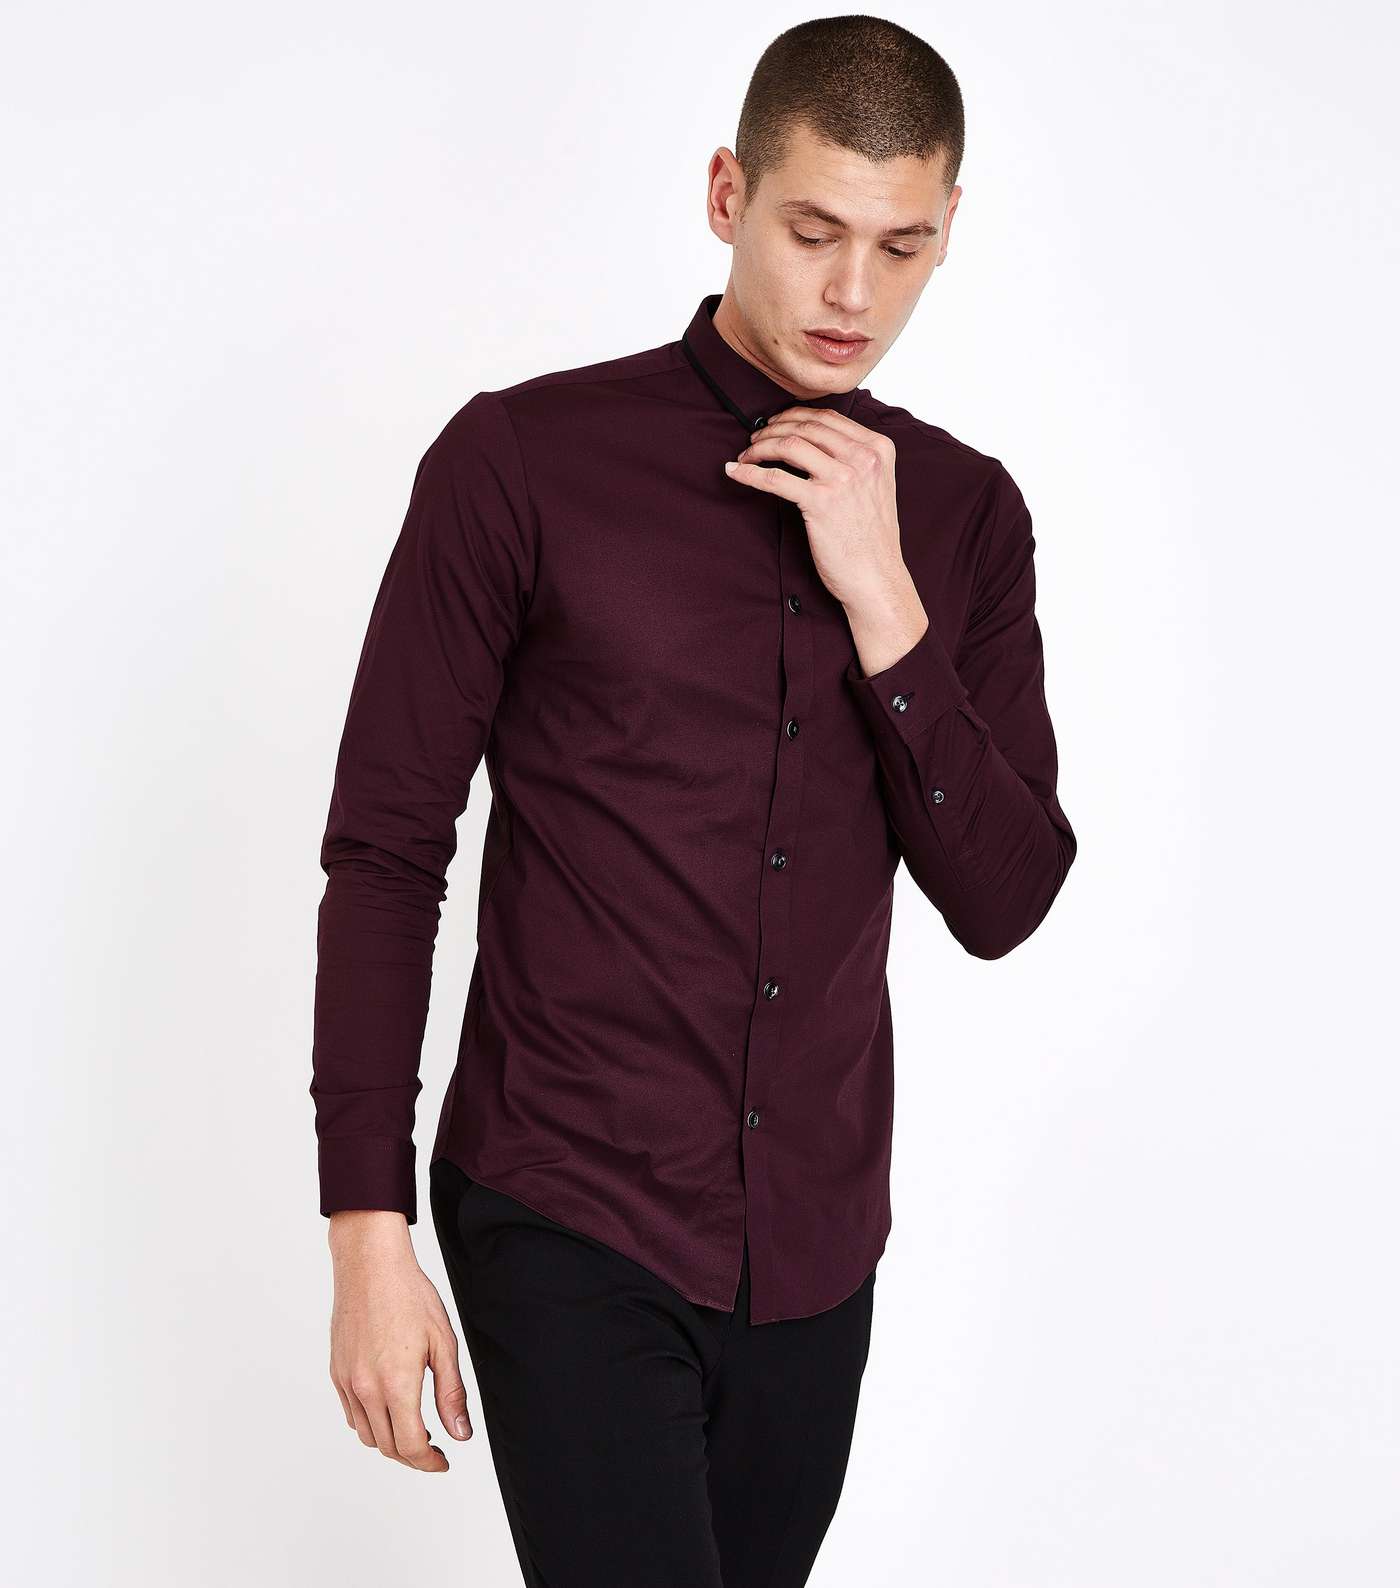 Burgundy Double Collar Trim Muscle Fit Shirt